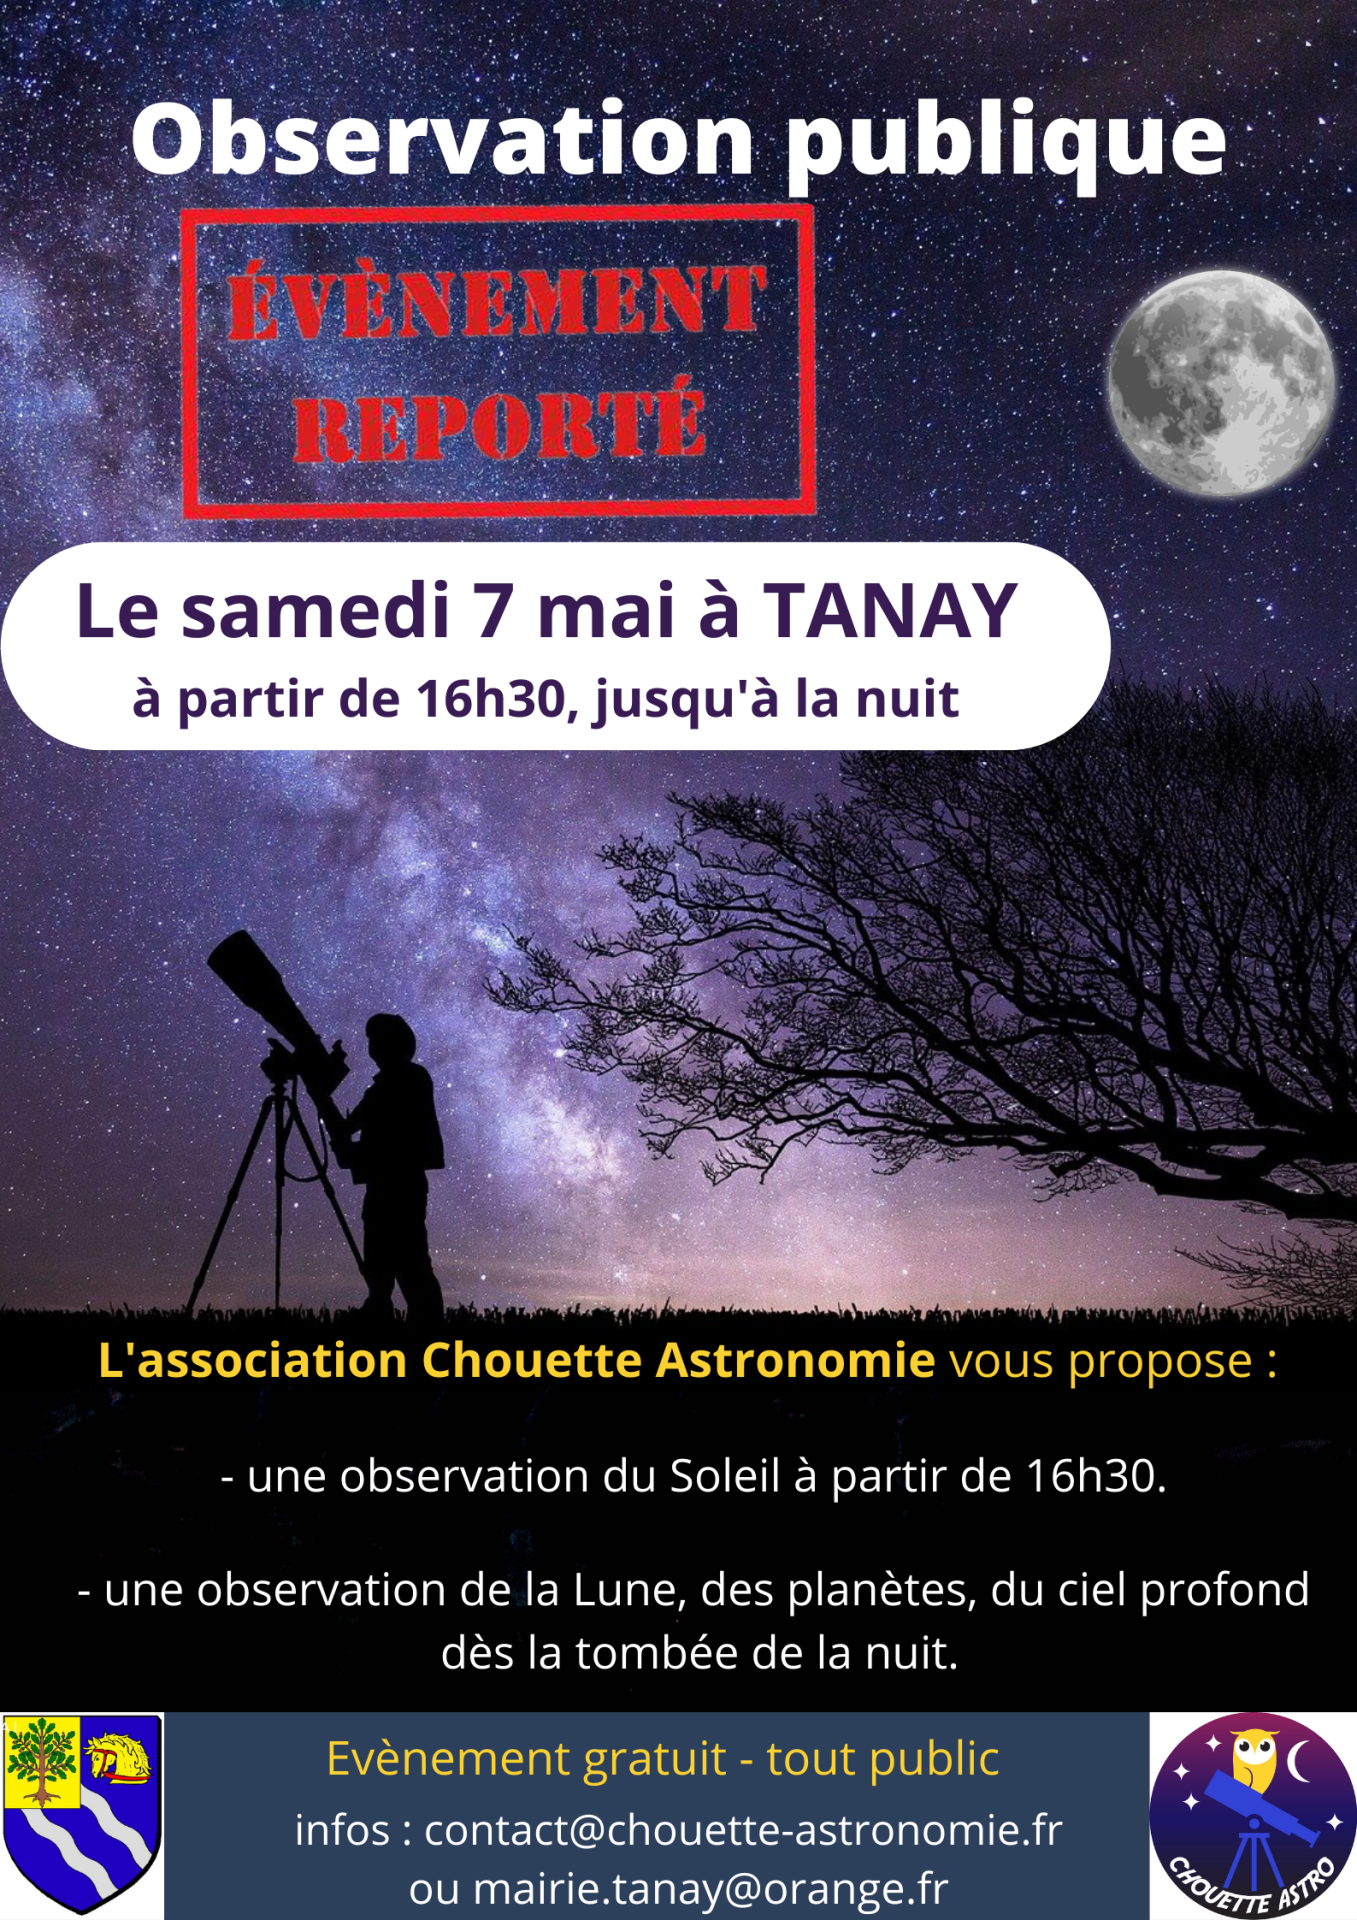 affiche observation astro annulée